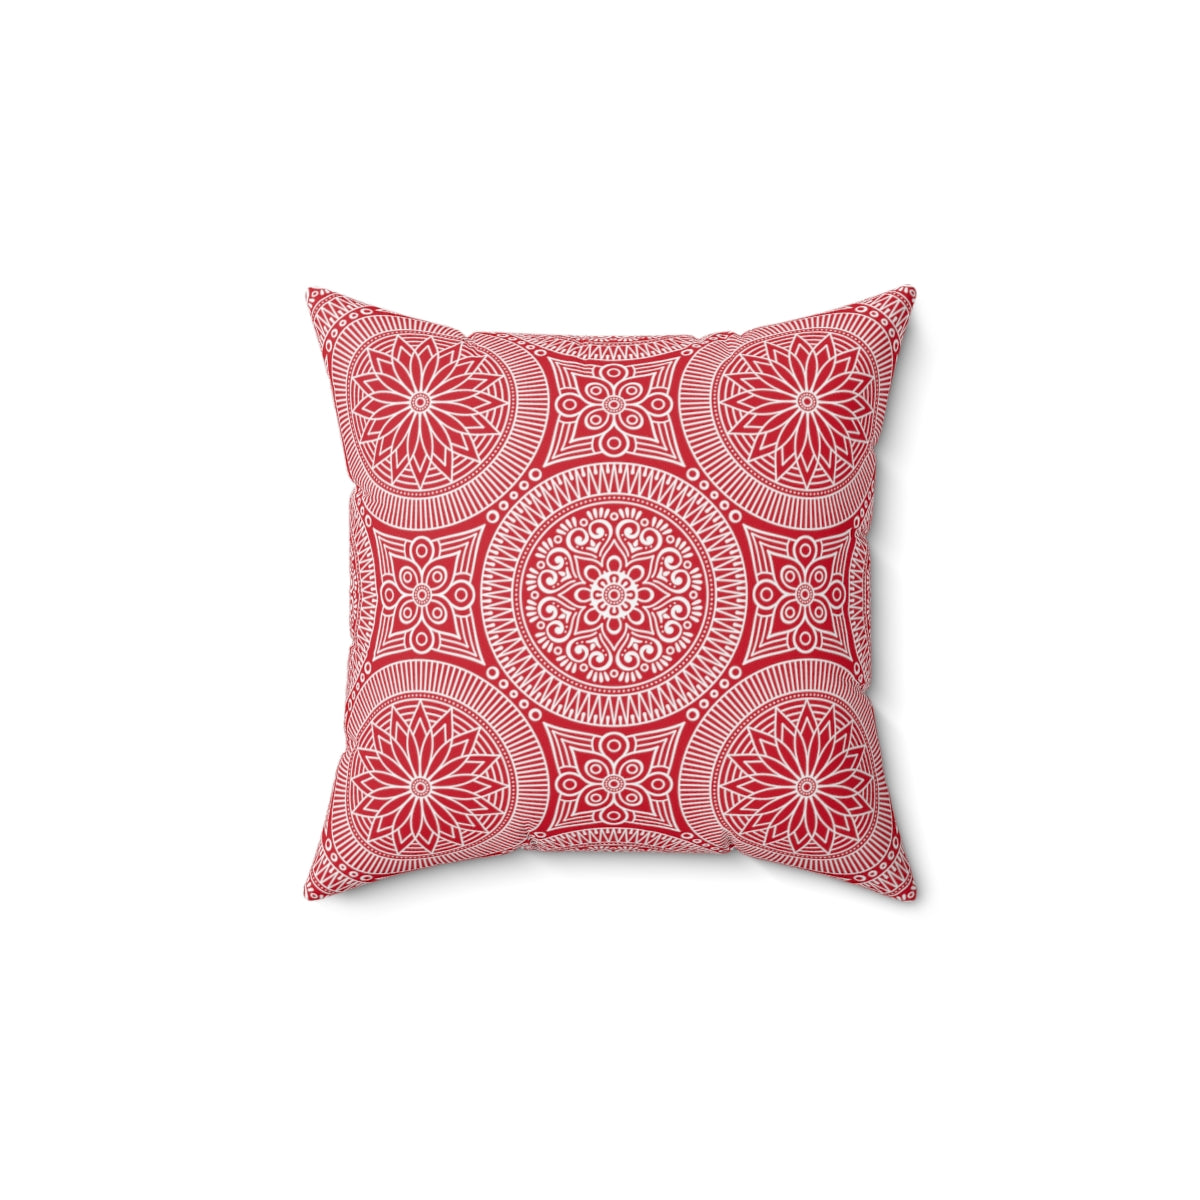 Spiritual Hooligan Faux Suede Square Pillow Red & White